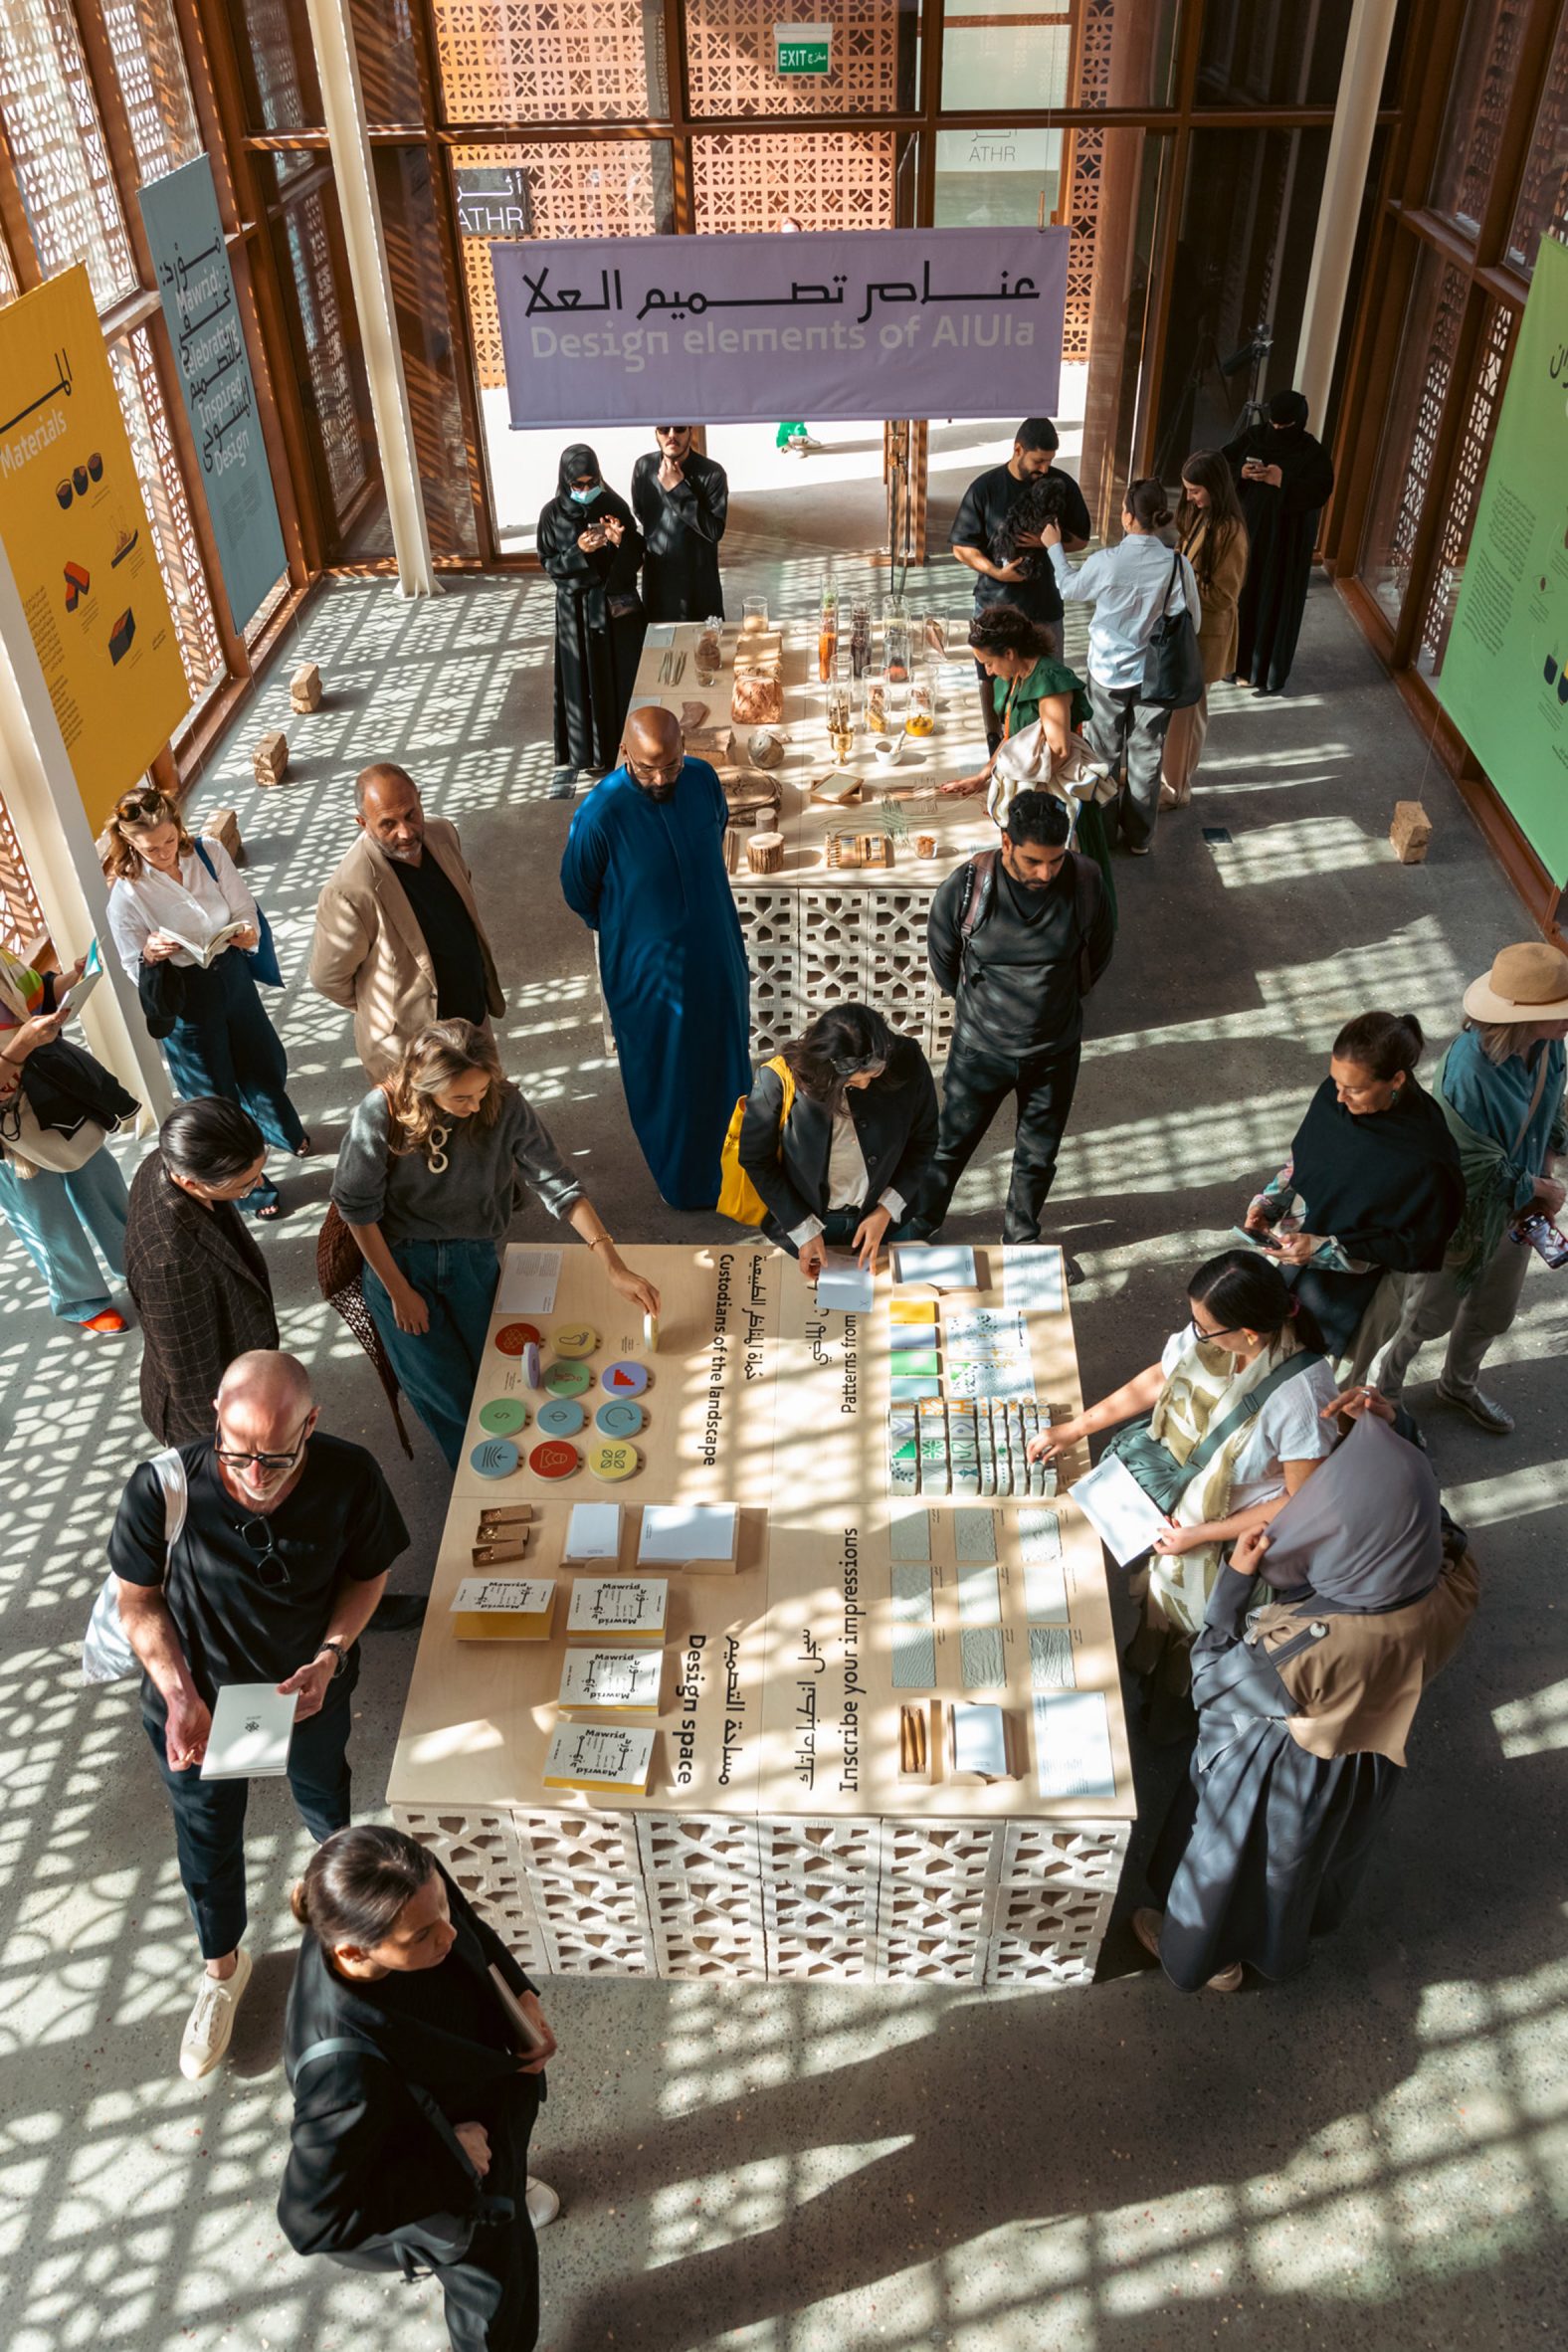 Overhead photo of people milling around a gallery space and looking at displays, amid interesting shadows created by patterned screens